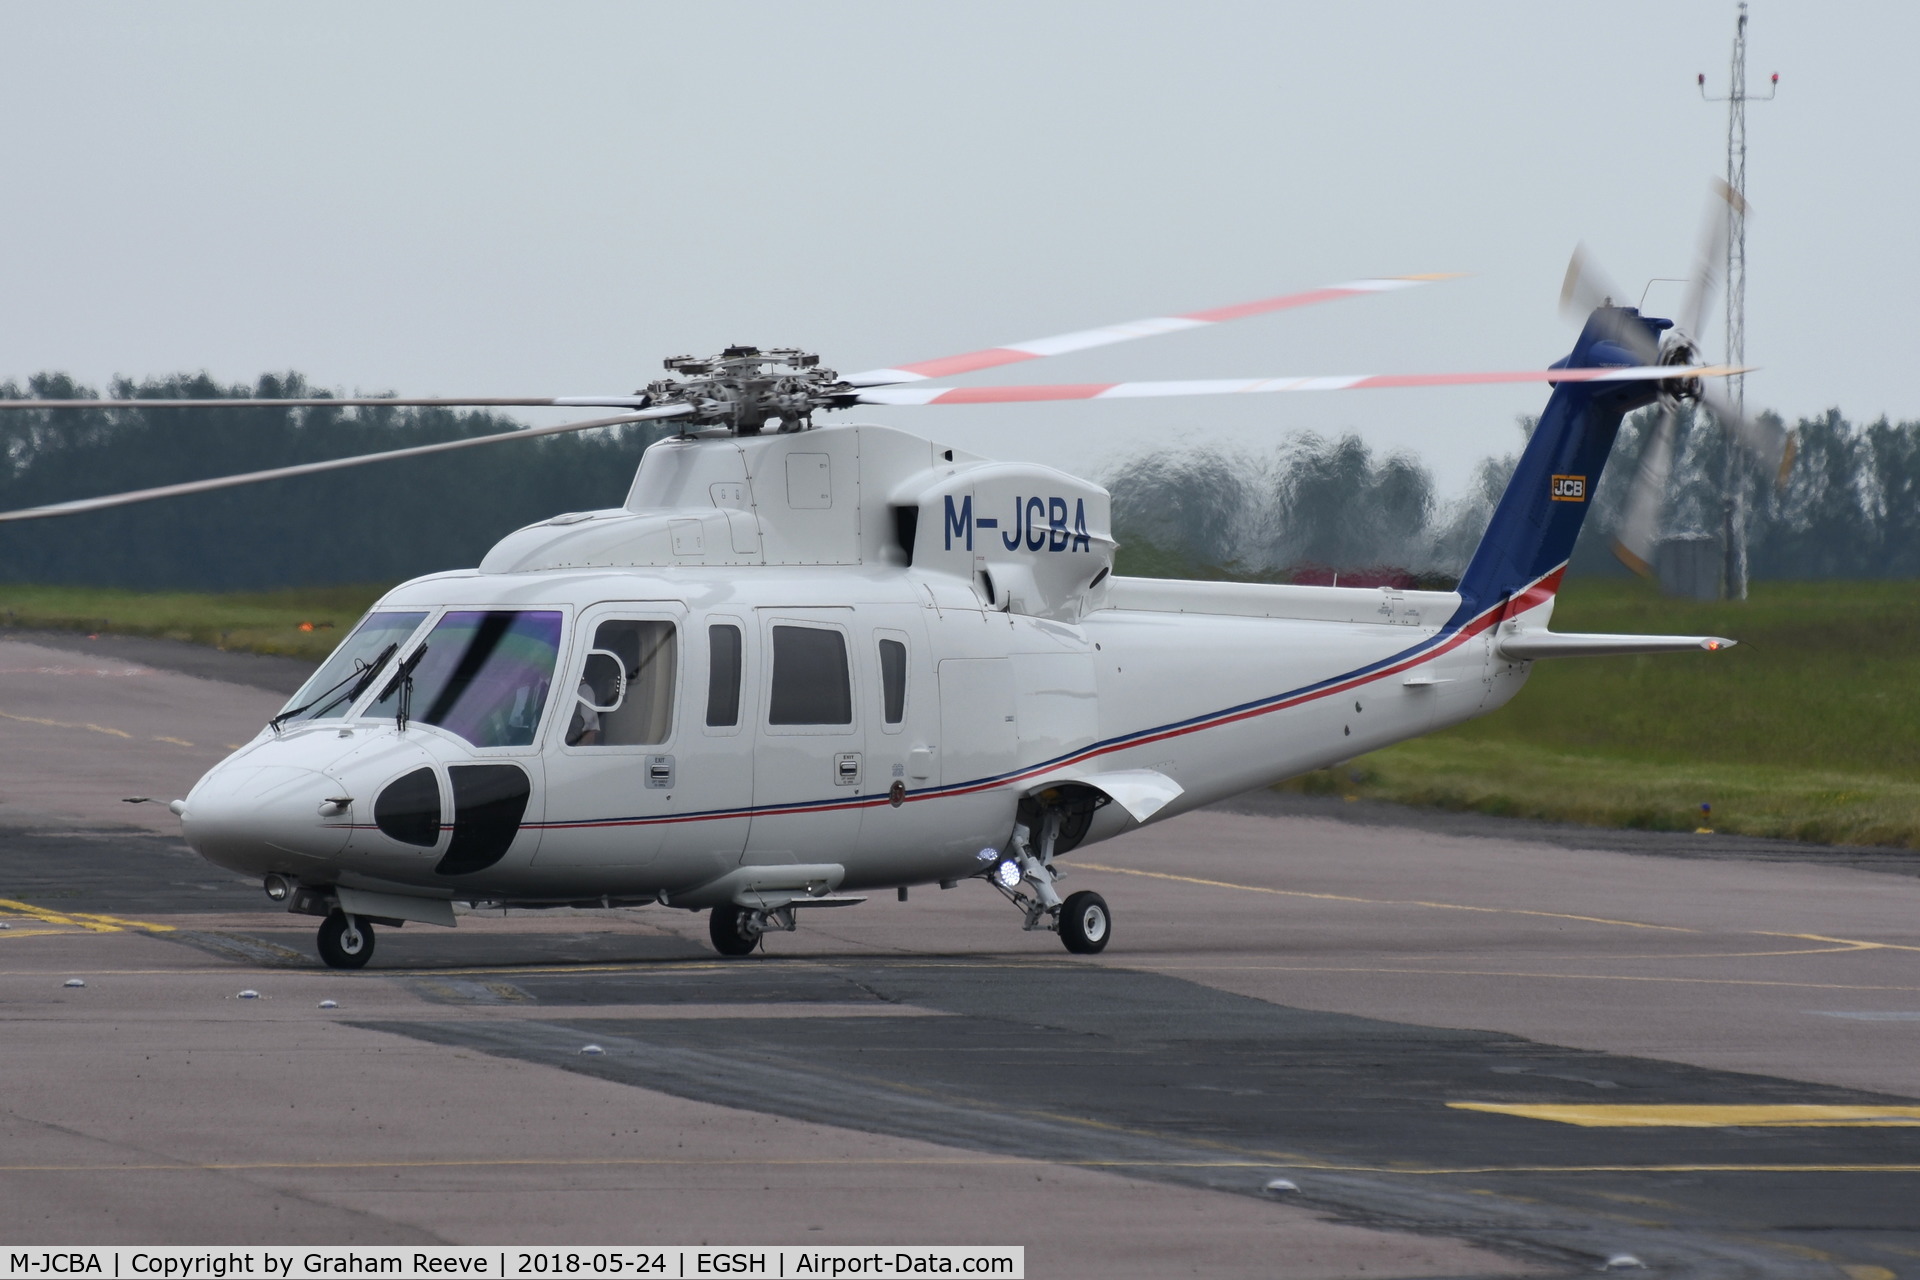 M-JCBA, 2011 Sikorsky S-76C C/N 760807, Just landed at Norwich.